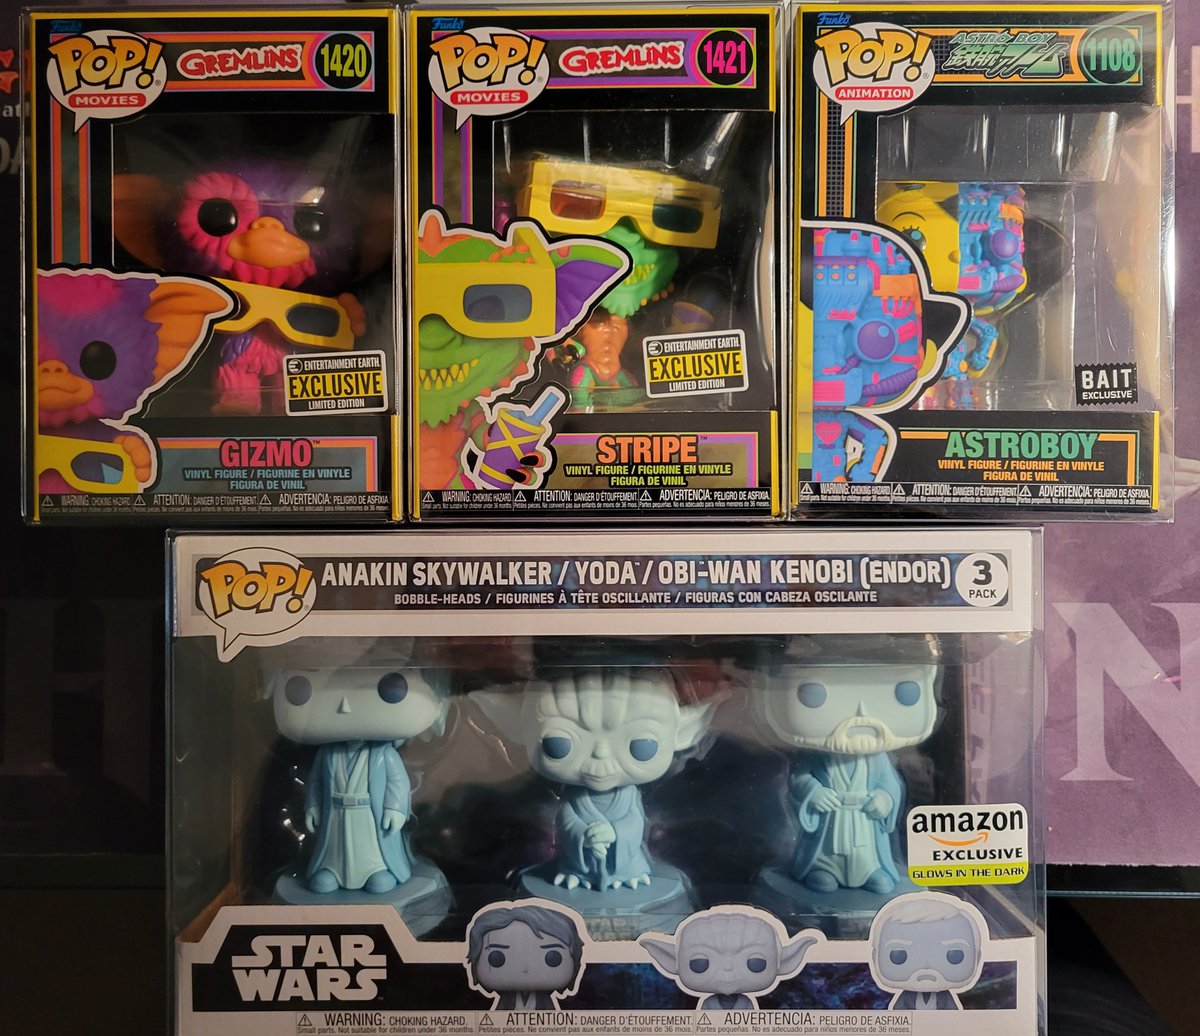 Mail Call!!📬Got the Starwars 3 pack and Astroboy in from @ANIME_ADDICT12...shipped super fast and minty!! Thanks so much!! Go check his sales out!! Gremlins fresh from @EpicCollectables!! #Funko #FunkoFamily #Starwars #Gremlins #AstroBoy #Blacklight